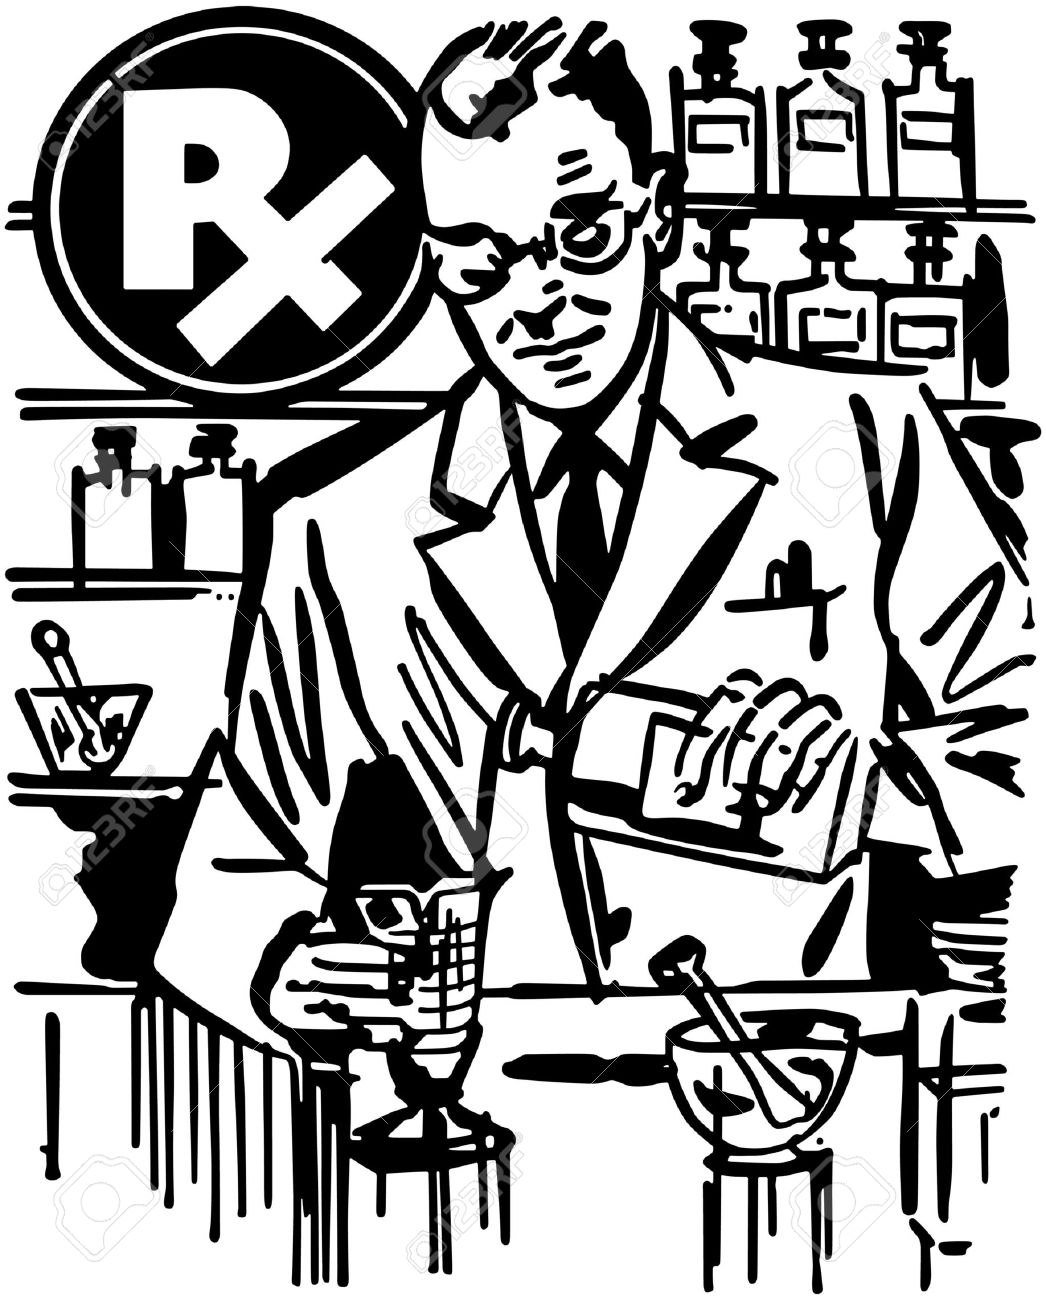 pharmacy clipart black and white